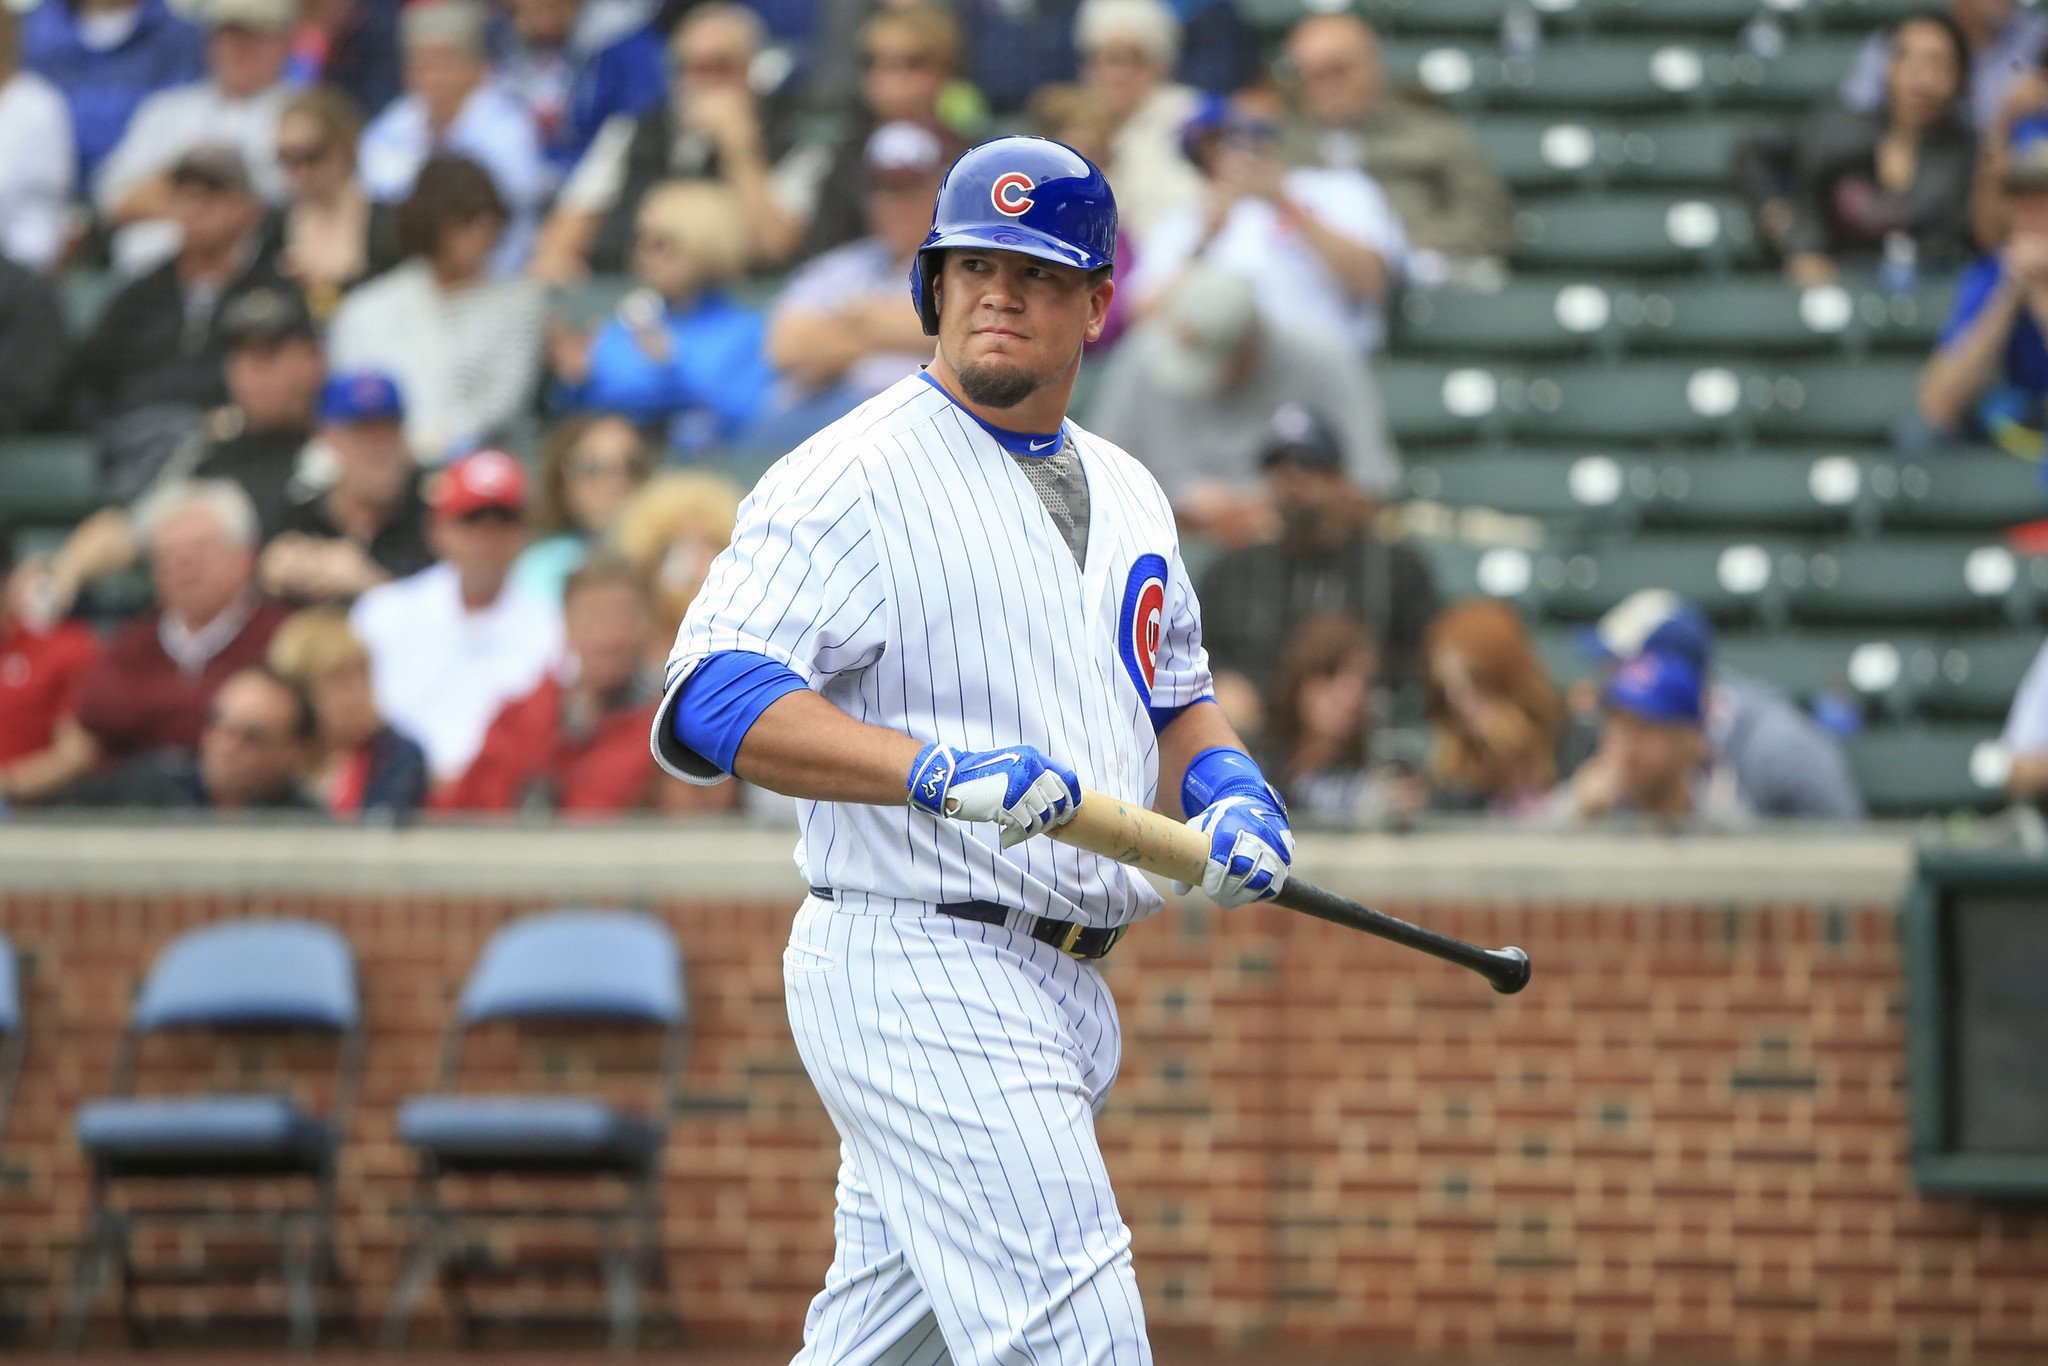 Where would Kyle Schwarber bat in your lineup? Swipe for Joe Maddon's  thoughts on why he likes him in the leadoff spot ➡️ #SageInsights